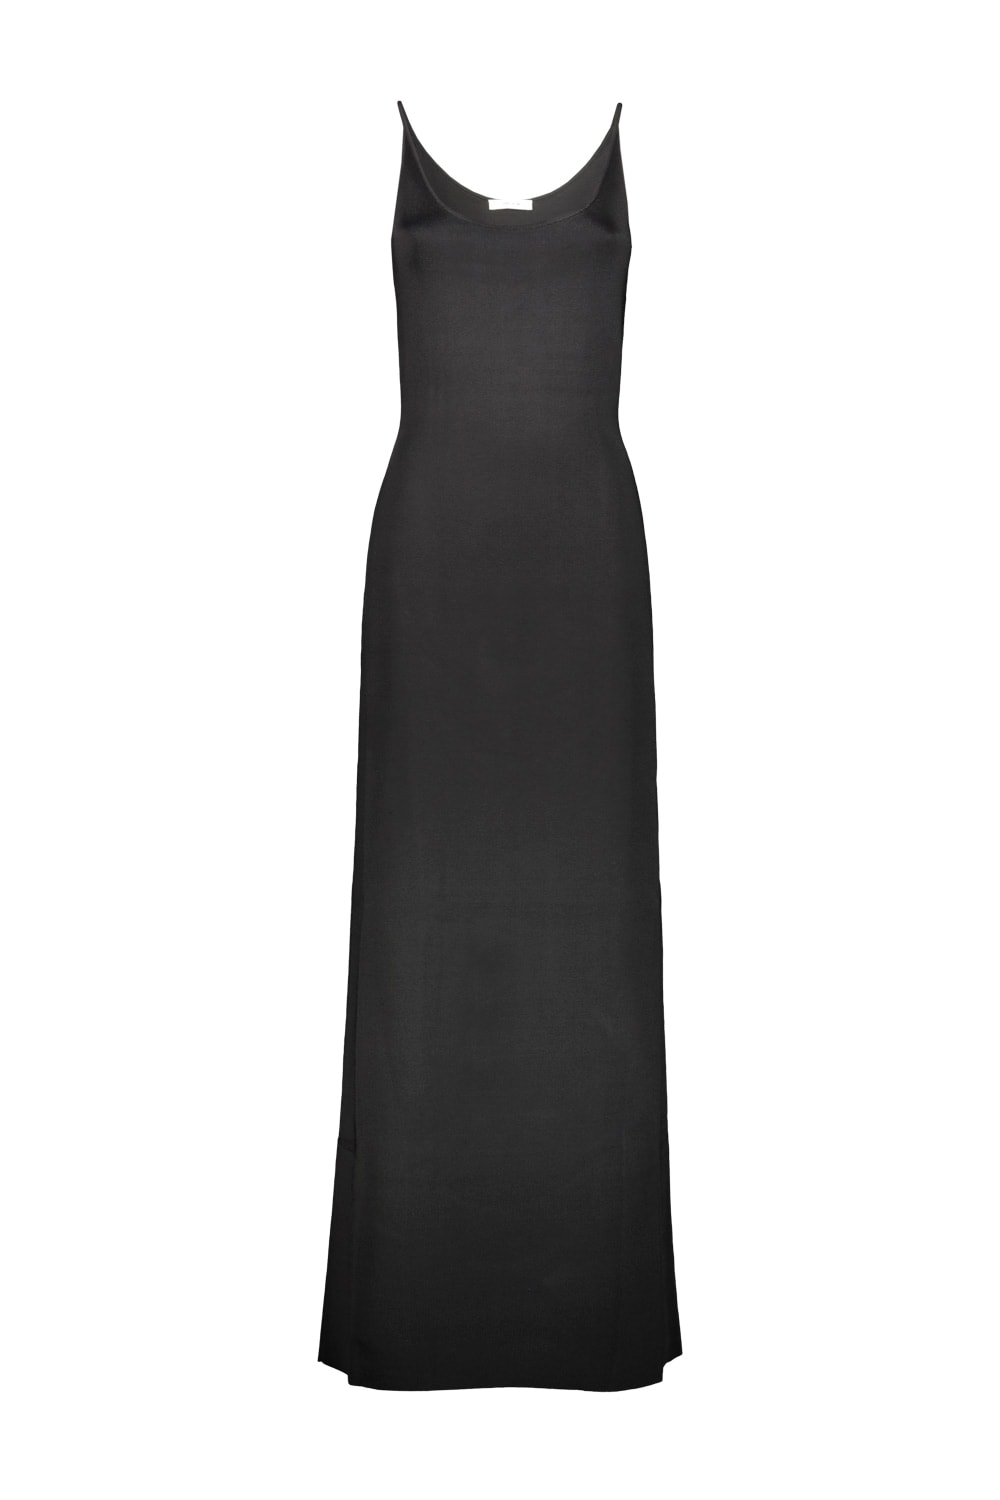 THE ROW CONSTANTINE DRESS IN VISCOSE